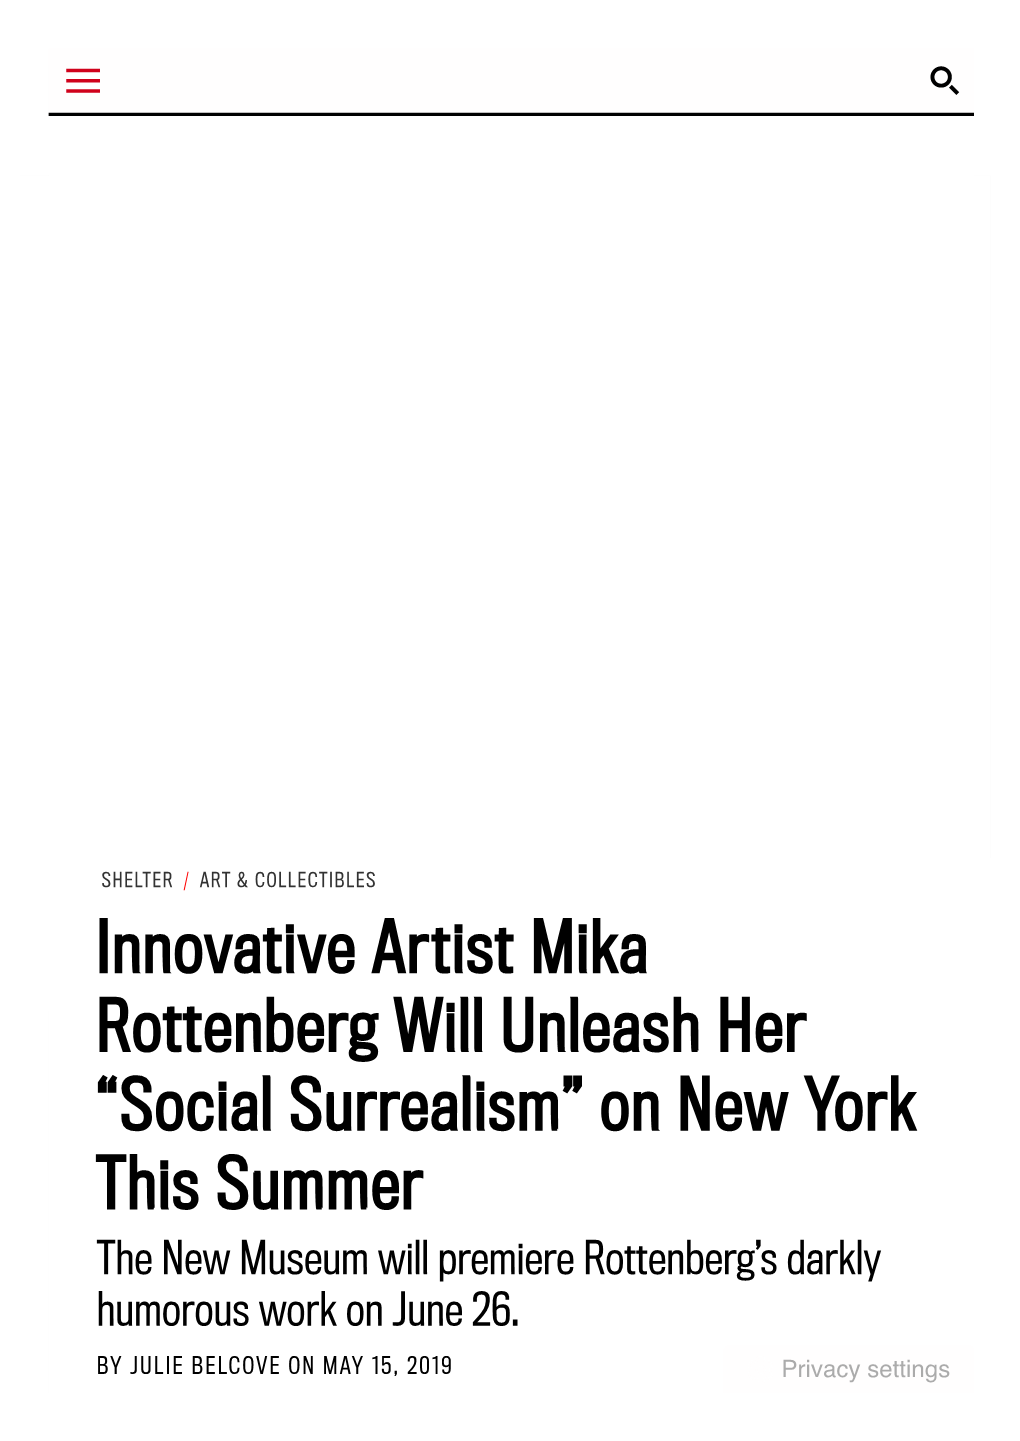 Mika Rottenberg Will Unleash Her “Social Surrealism” on New York This Summer the New Museum Will Premiere Rottenberg’S Darkly Humorous Work on June 26